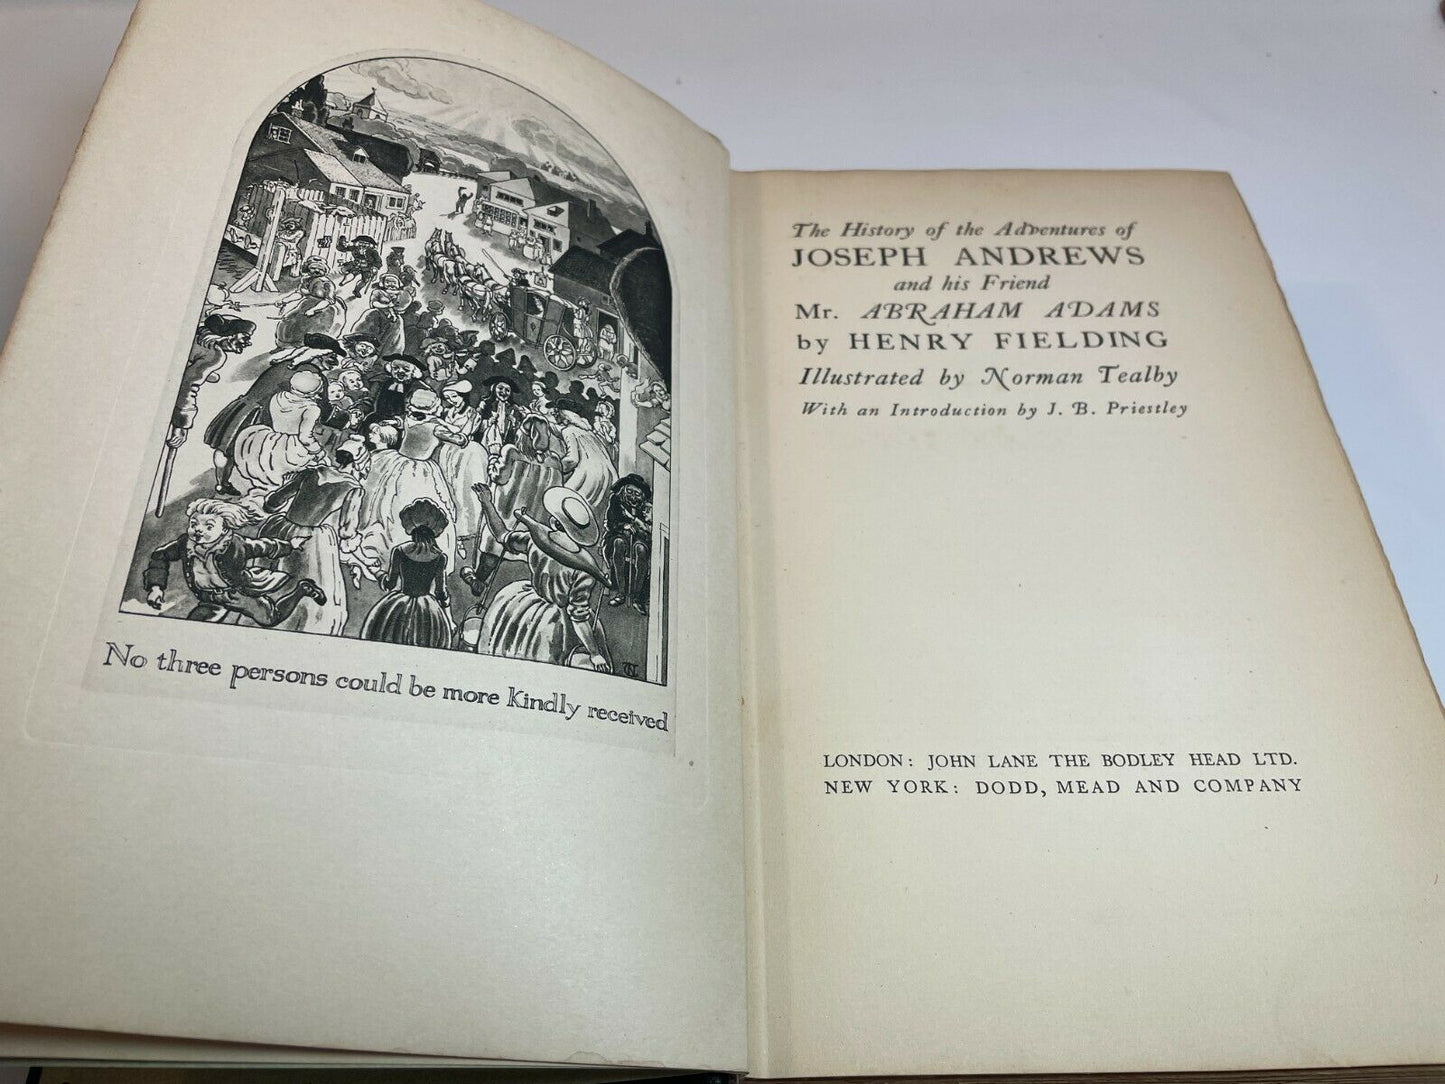 The History of the Adventures of Joseph Andrews & his Friend, Fielding,1929, B3